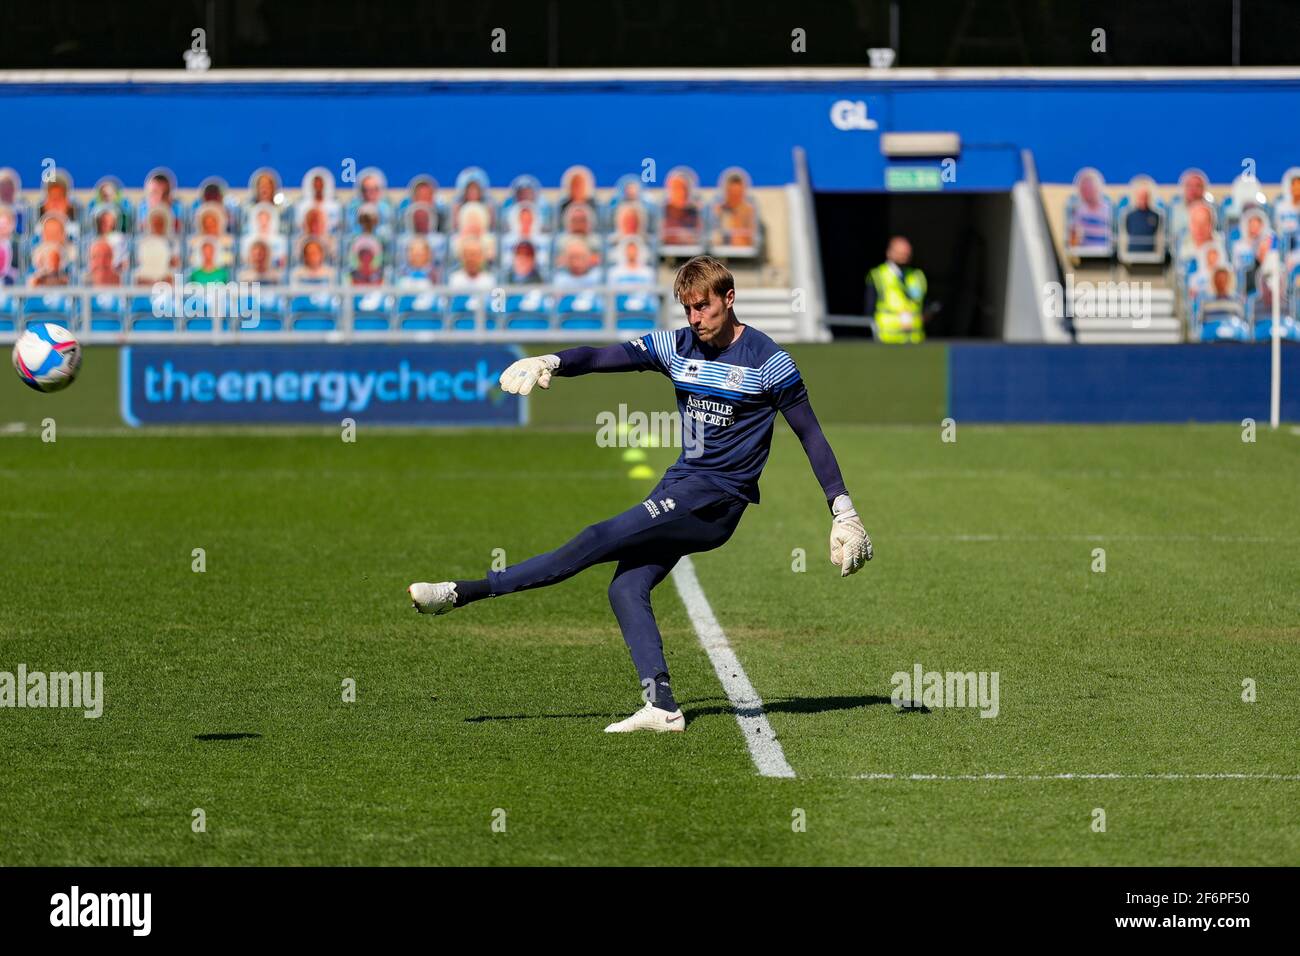 London Uk April 2nd Qpr Goalkeeper Joe Lumley Warms Up Before The Sky Bet Championship Match Between Queens Park Rangers And Coventry City At Kiyan Prince Foundation Stadium London On Friday 2nd